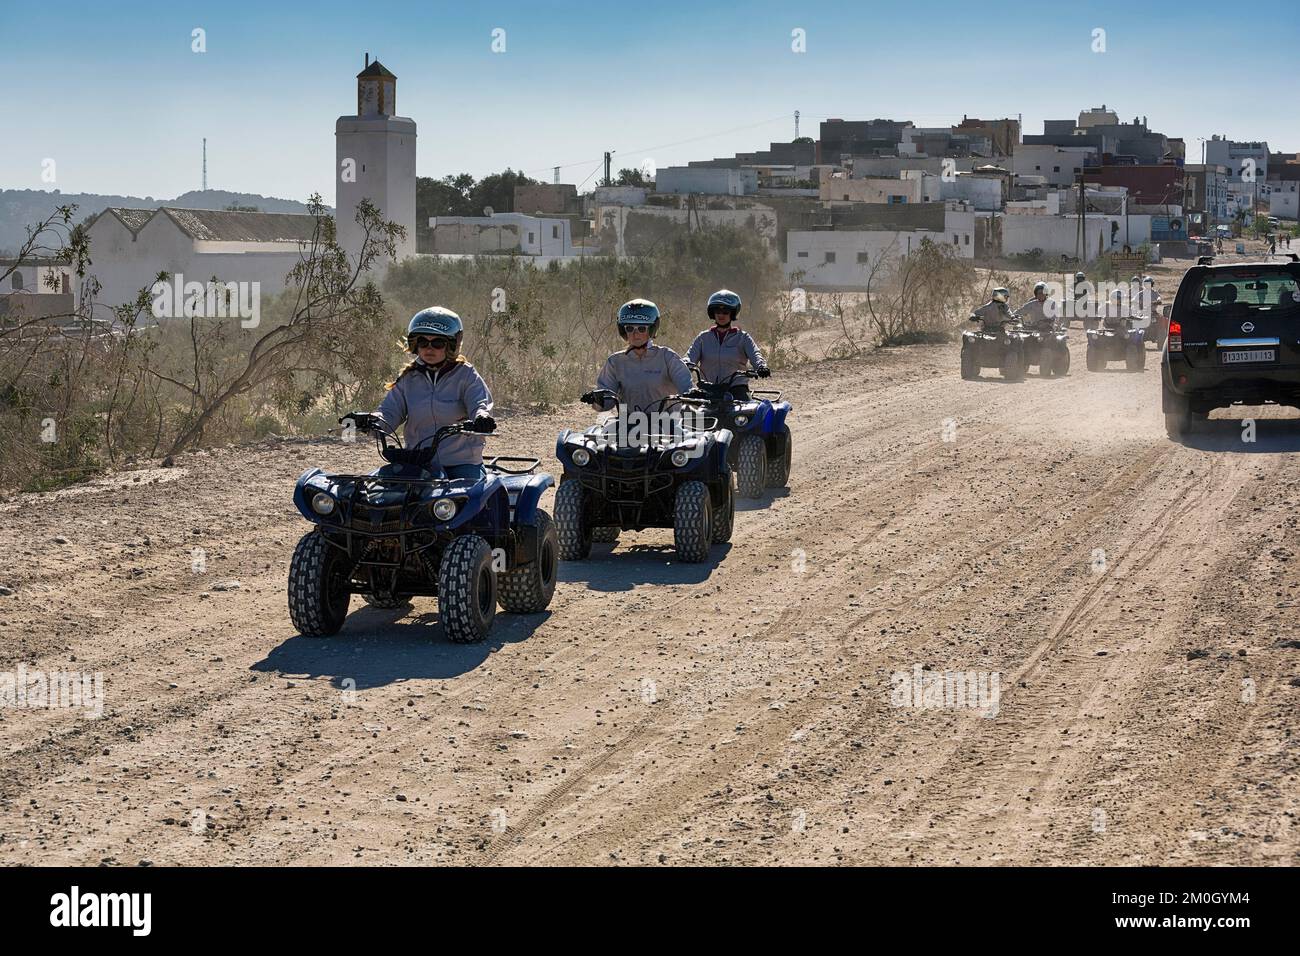 Young quad riders, tourist group on gravel road, Diabat, Essaouira, Morocco, Africa Stock Photo